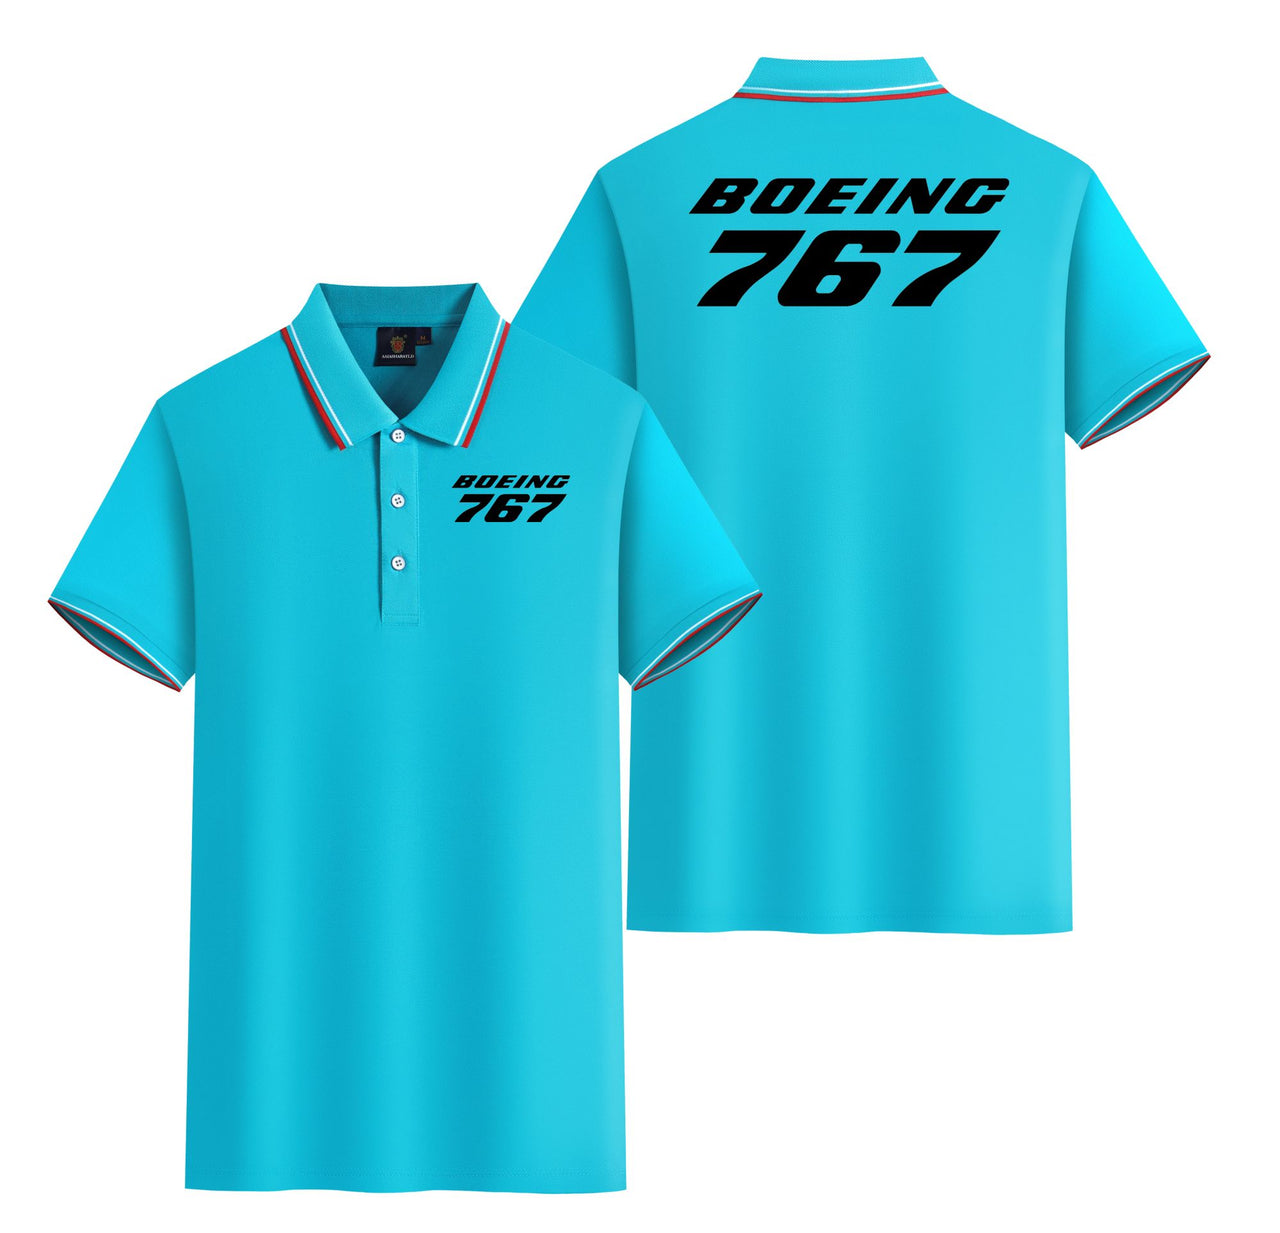 Boeing 767 & Text Designed Stylish Polo T-Shirts (Double-Side)